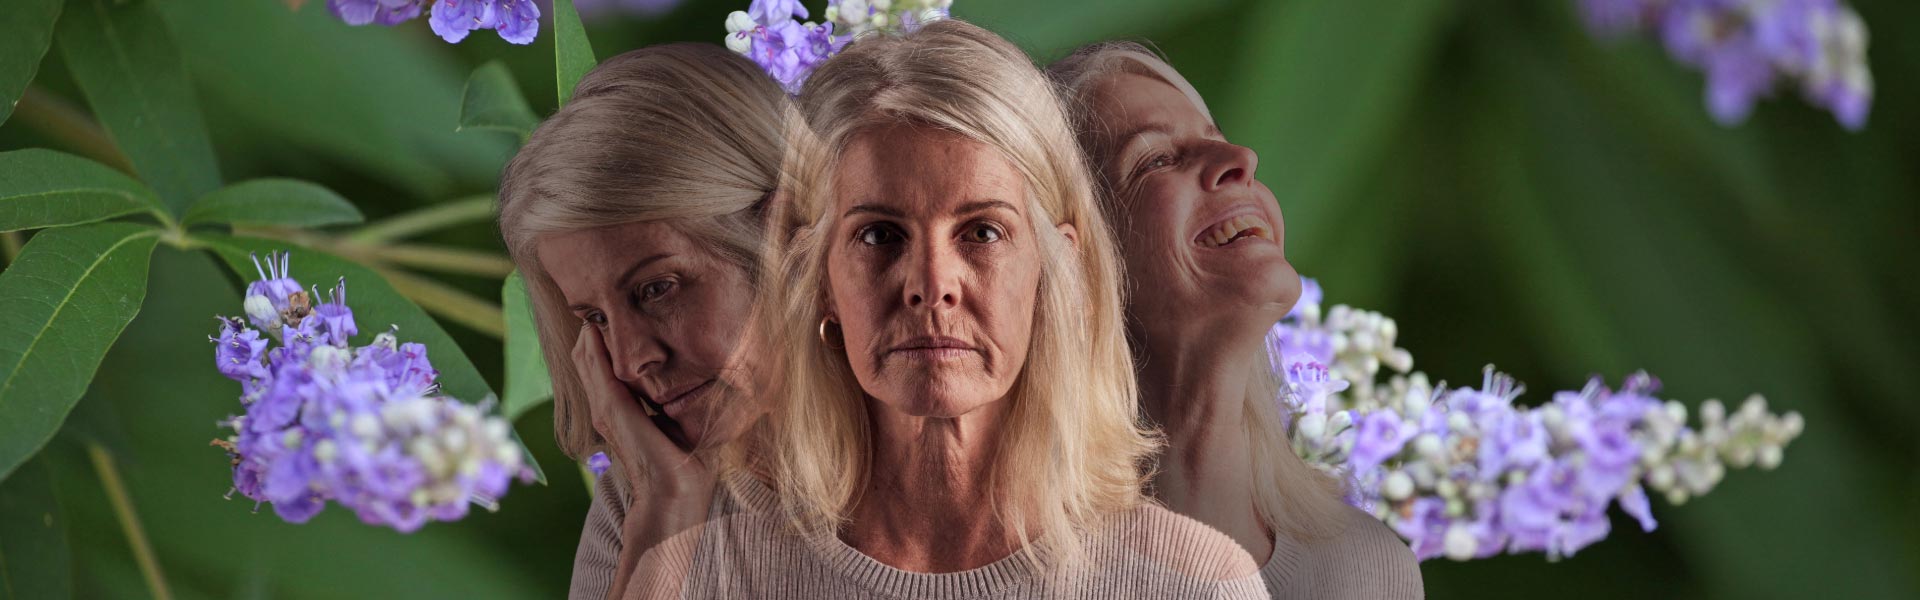 Mood swings - menopause - a woman showing three faces